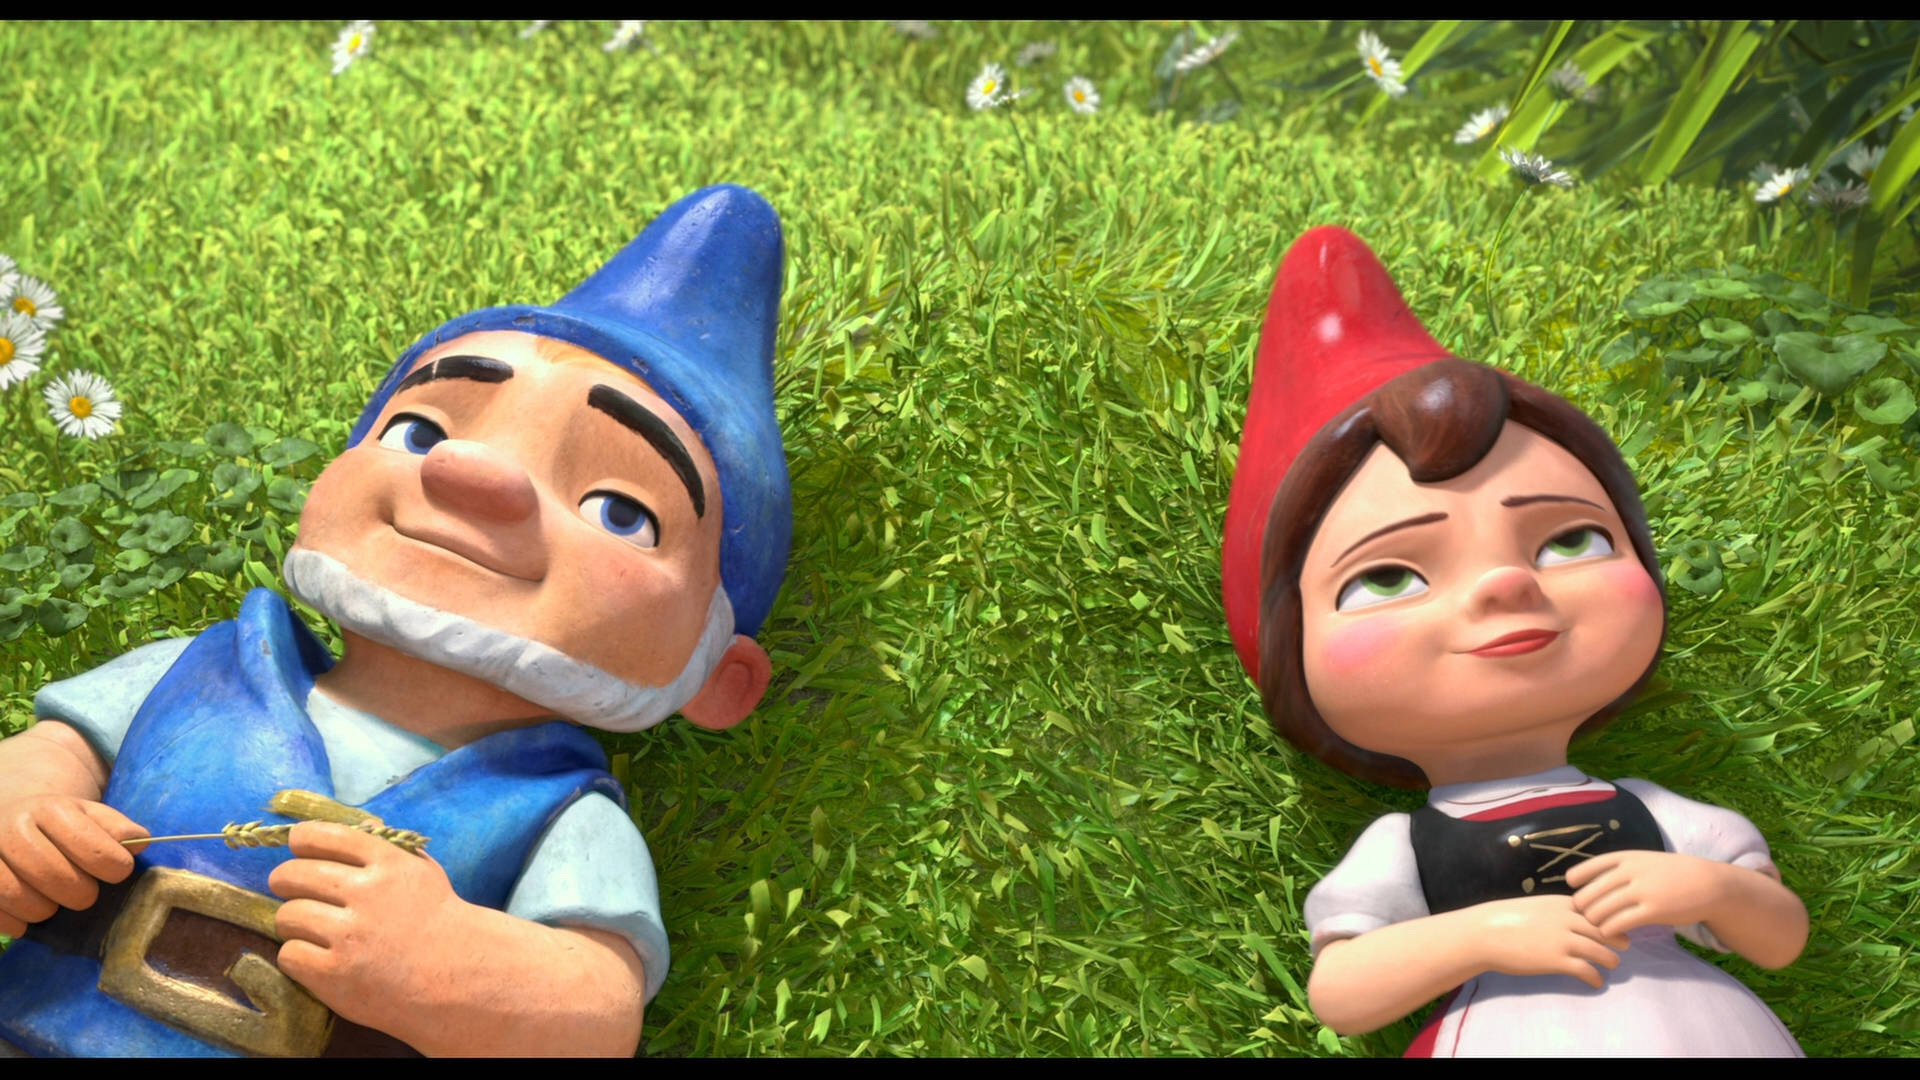 Gnomeo And Juliet Lying On Grass Wallpaper